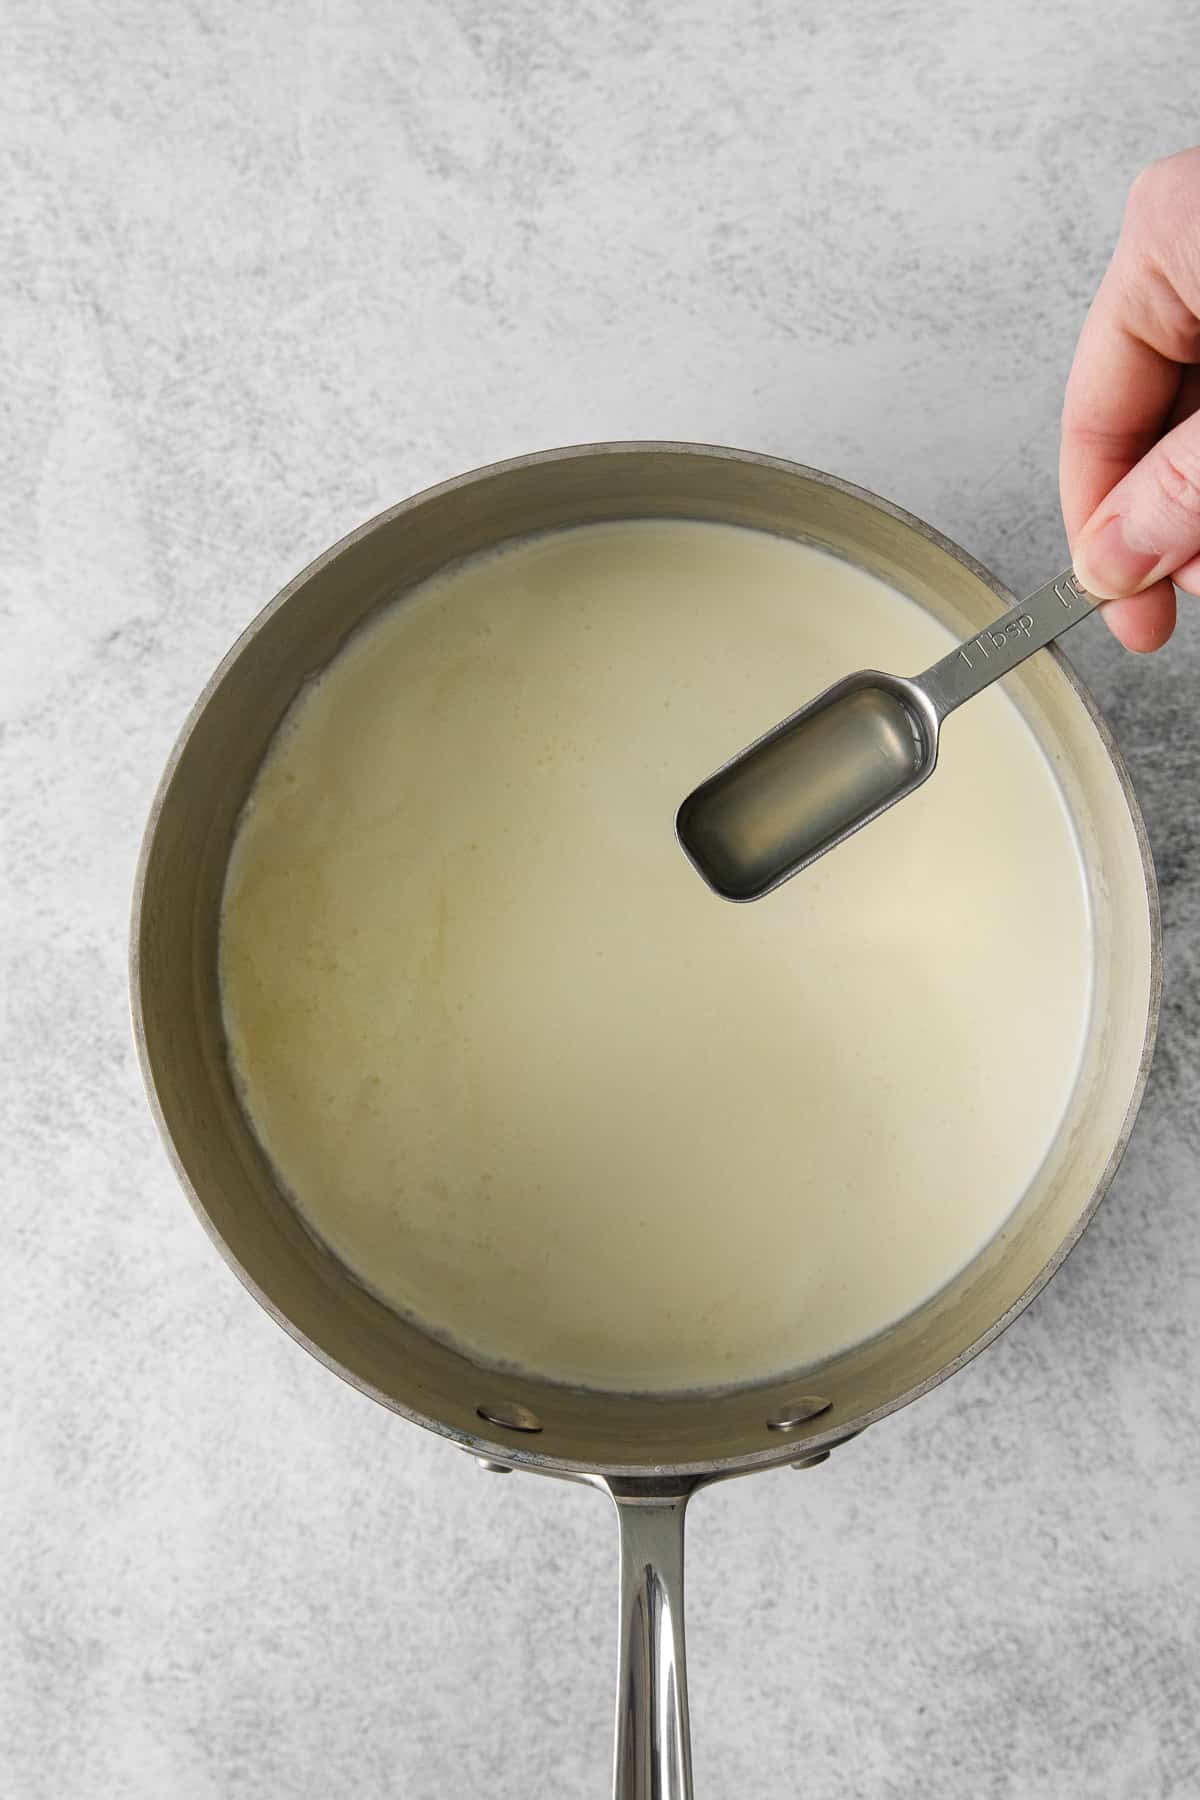 Lemon juice being poured into heavy cream in a saucepan.